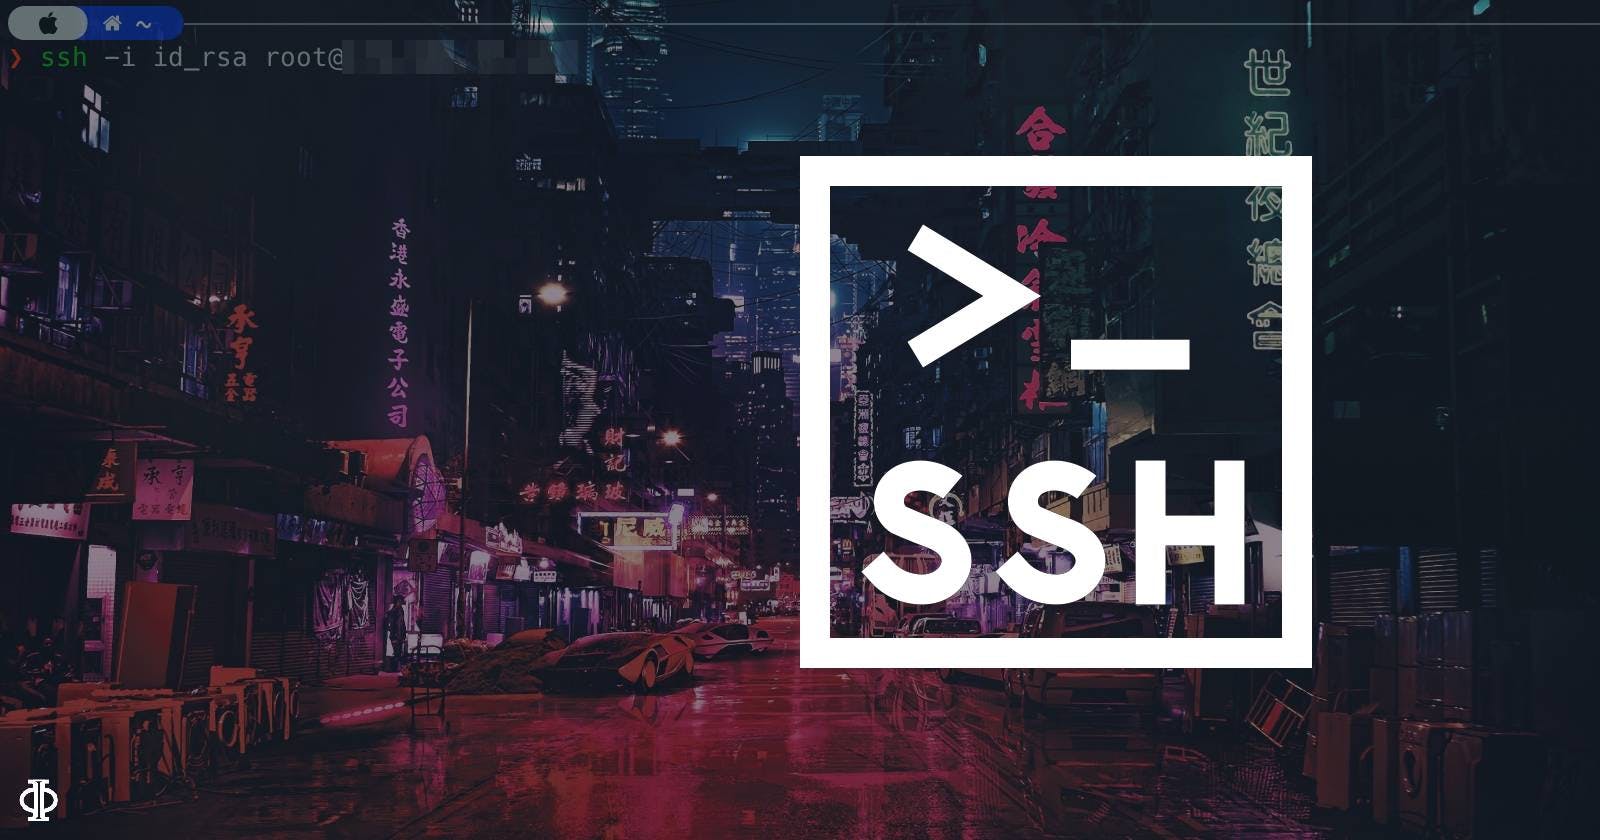 The Elusive SSH: Hunt For The Public IP